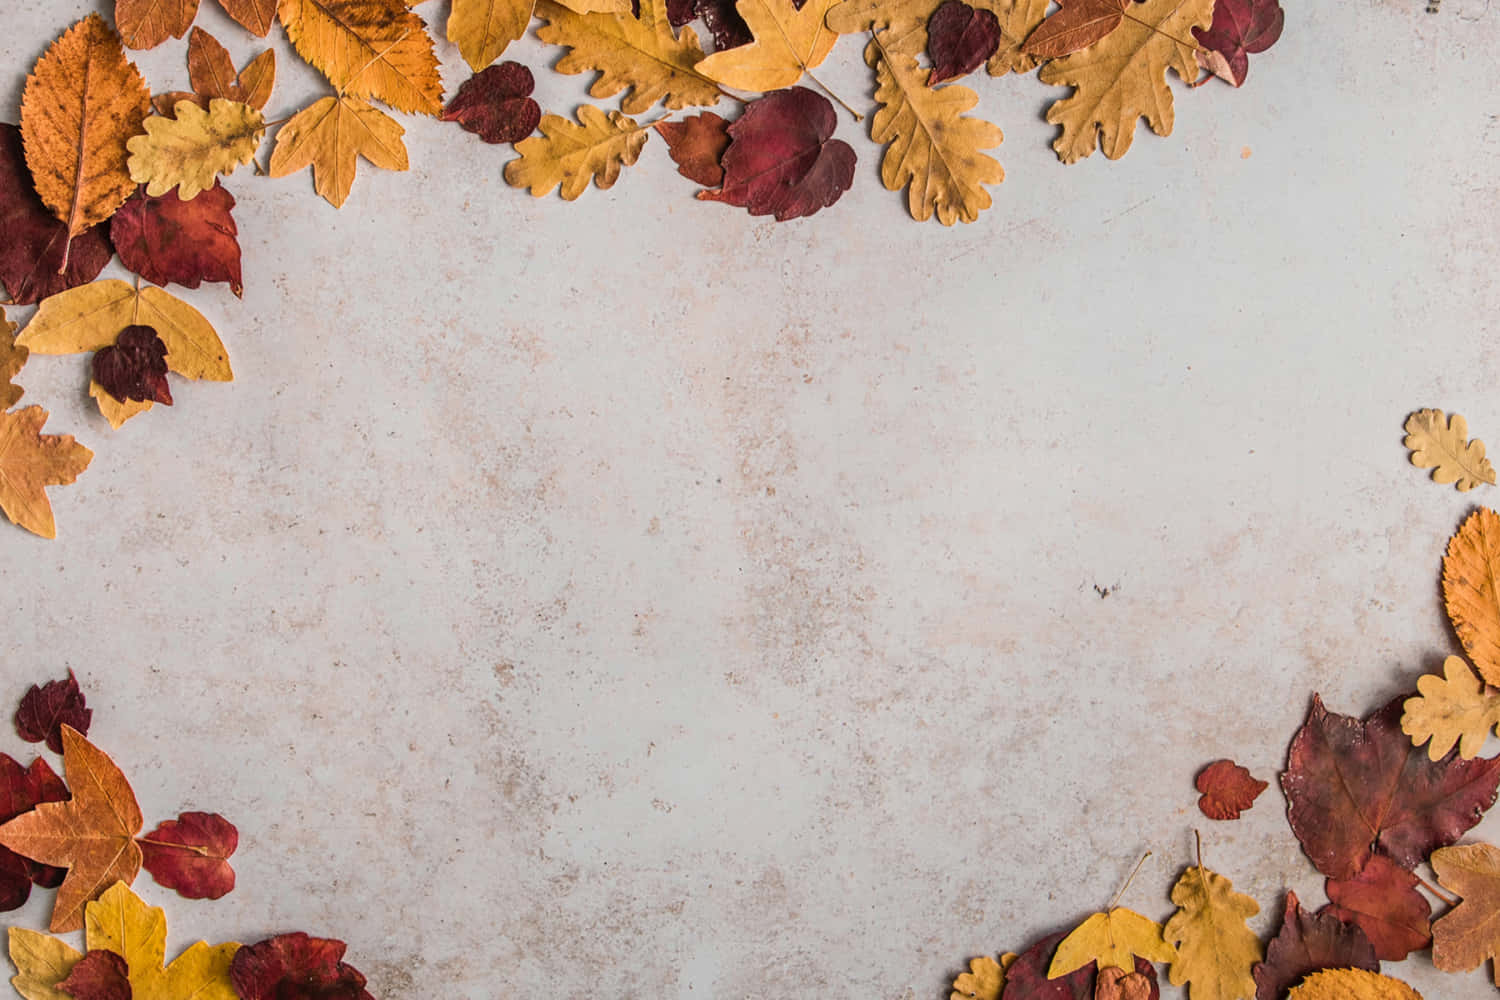 Autumn Leaves Arranged In A Heart Shape On A Concrete Background